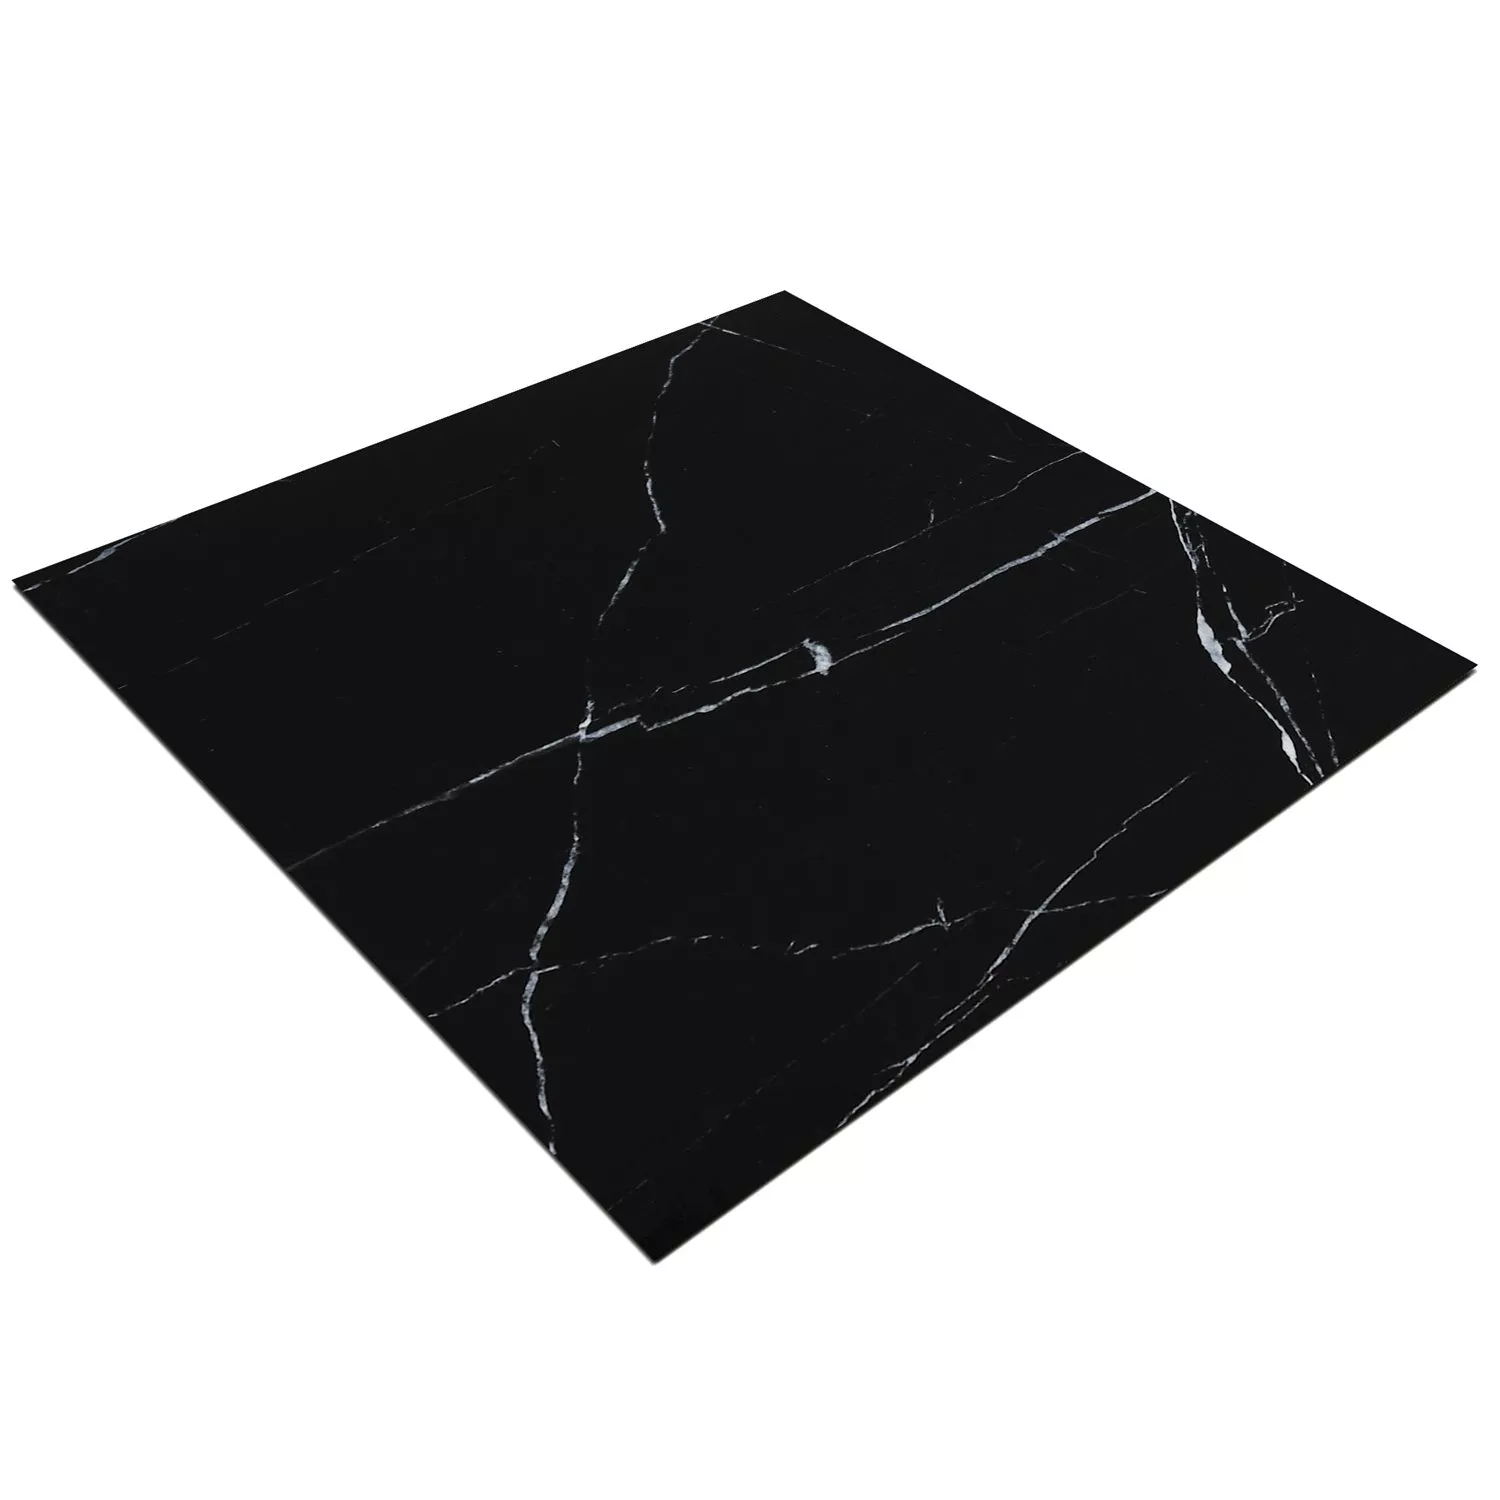 Sample Natural Stone Optic Tiles Discovery Nero 60x60cm